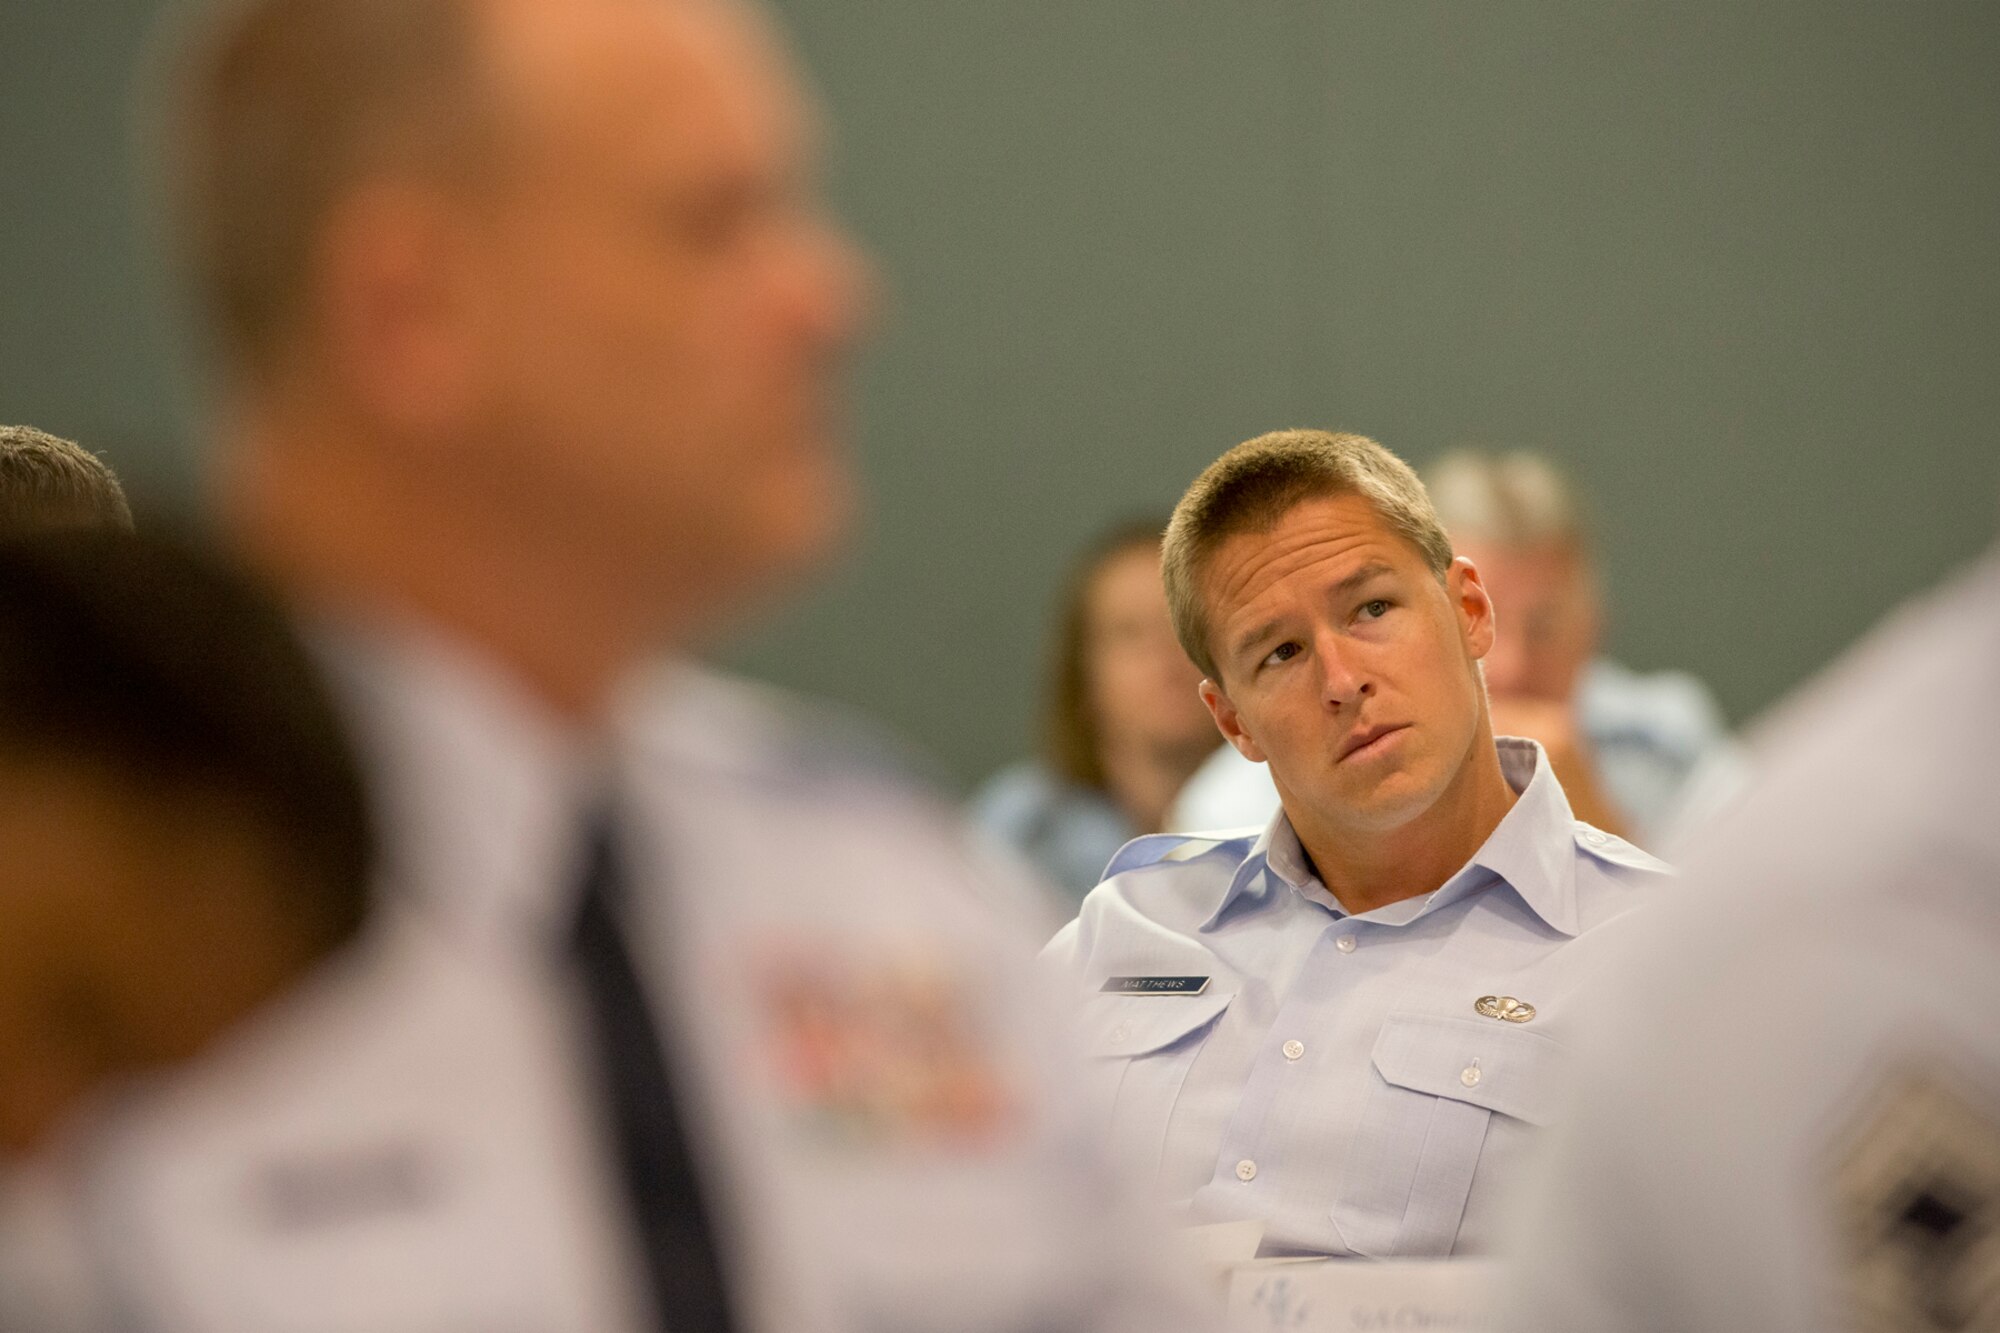 Tech. Sgt. Douglas Matthews, a combat controller assigned to the 125th Special Tactics Squadron, Oregon Air National Guard, listens to a briefing by Chief Master Sgt. James W. Hotaling, the command chief of the ANG, as he addresses the Chief's Executive Course at Joint Base Andrews, Md. Aug. 4, 2014. Matthews, who was recently awarded the Silver Star, the nation's third-highest award for valor, is the ANG Outstanding Non Commissioned Officer of the Year. The CEC provides recently-promoted chief master sergeants with a broad view of total force operations at a strategic level. (Air National Guard photo by Master Sgt. Marvin R. Preston/Released)